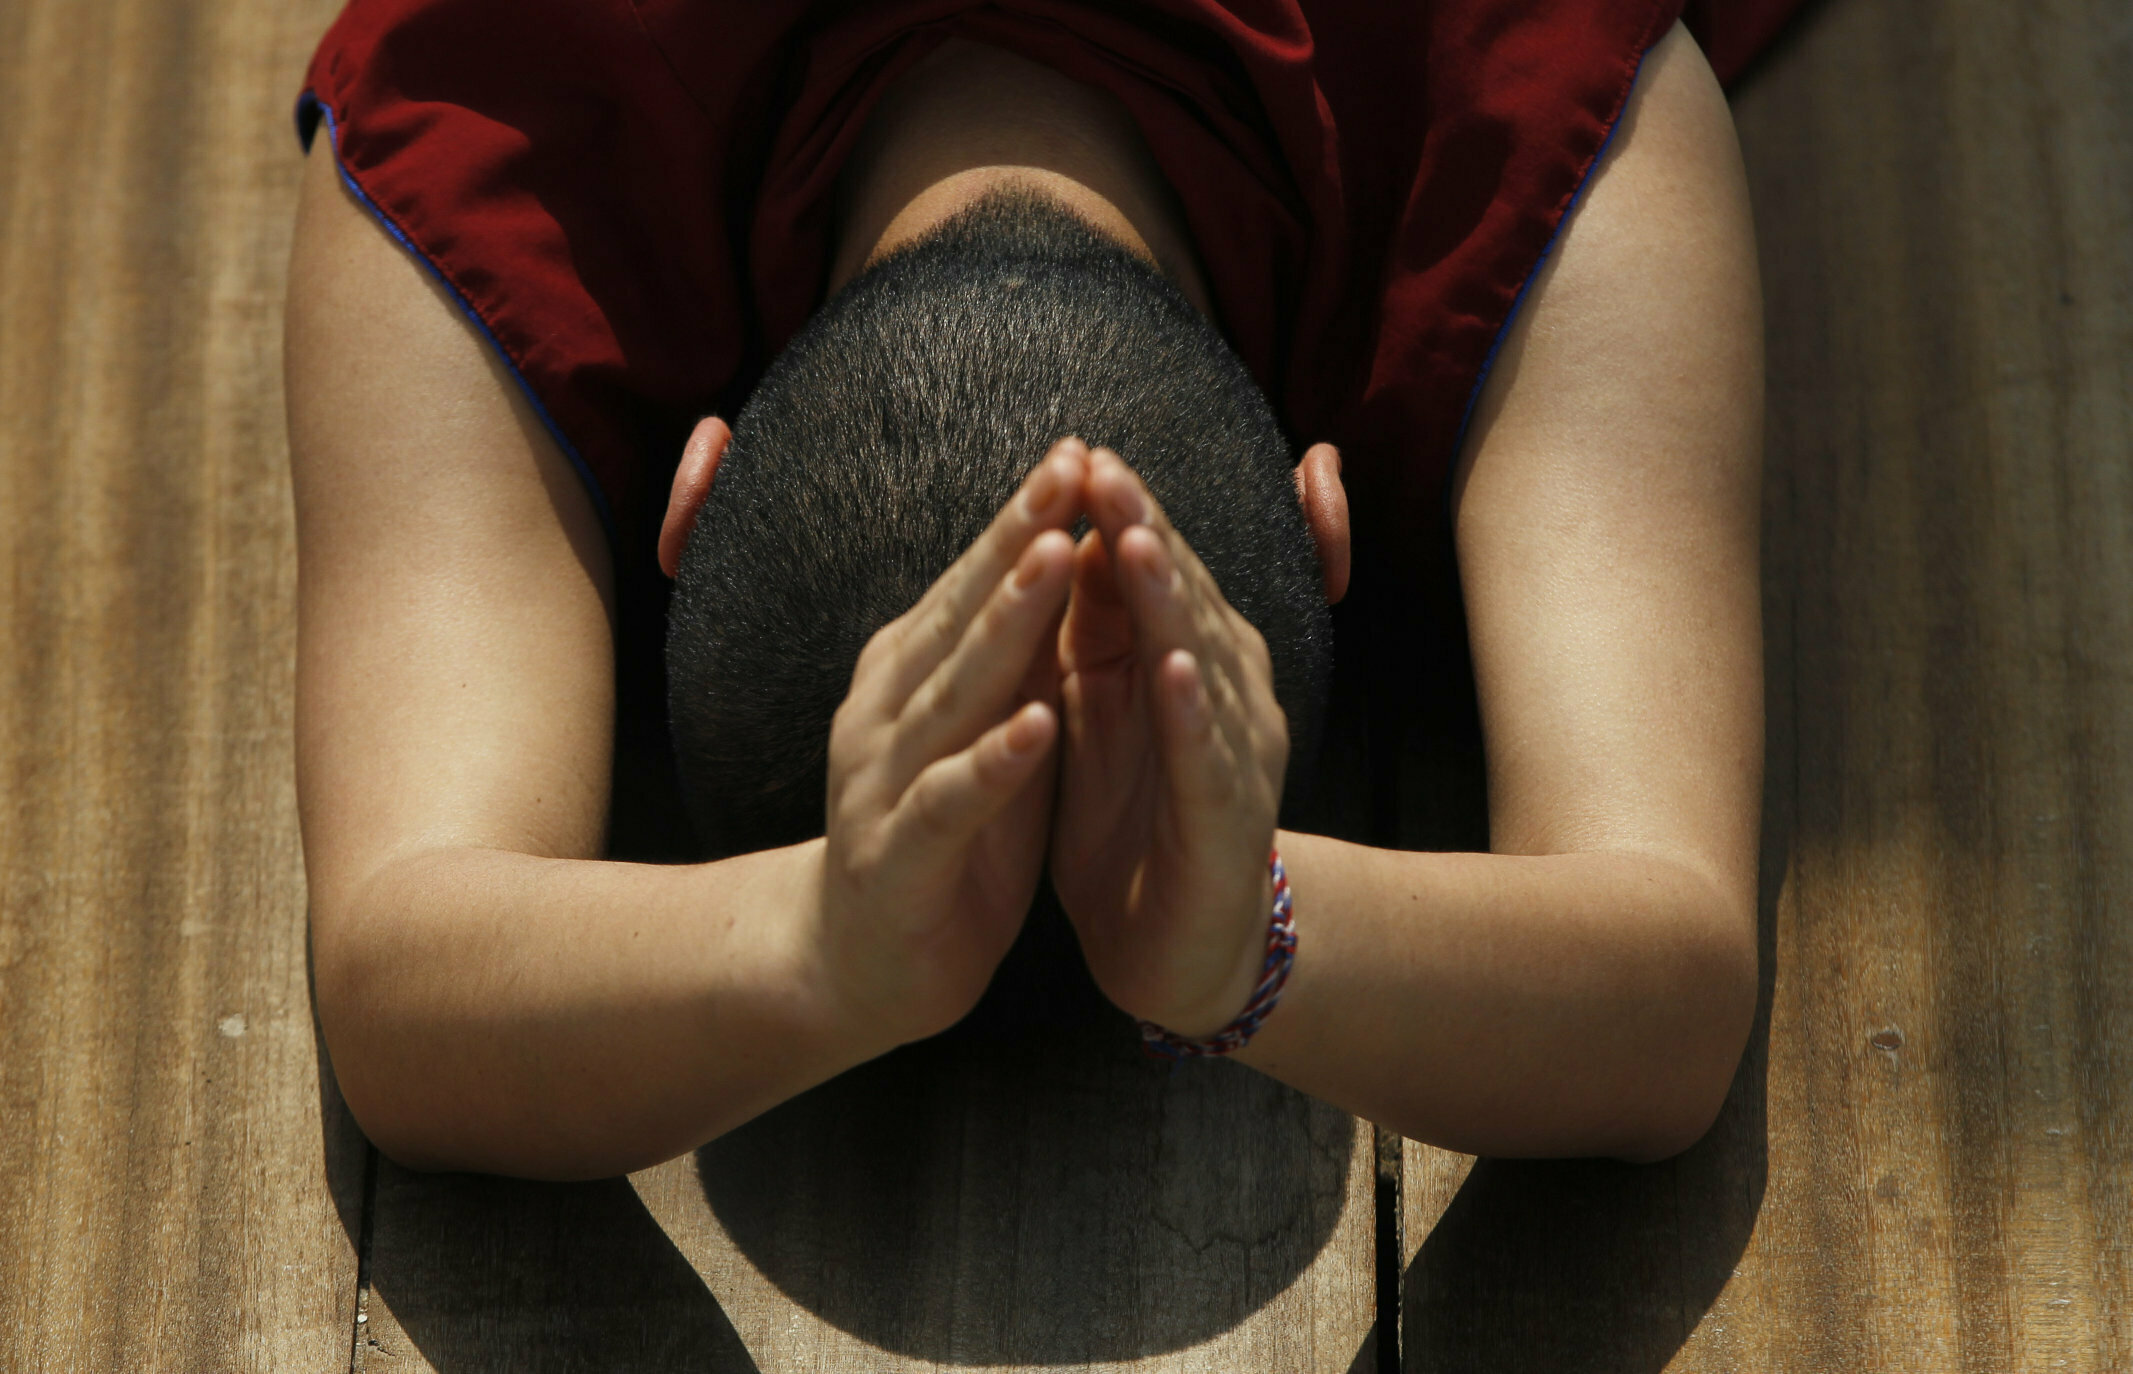 A Buddhist nun prostrates performing Buddhist religious rituals during Buddha Jayanti, or Buddha Purnima, festival in Kathmandu, Nepal, Saturday, May 18, 2019. The festival marks the triple events of Gautam Buddha's life: his birth, his enlightenment and his attaining a state of Nirvana that frees believers from the circle of death and rebirth. (AP Photo/Niranjan Shrestha)